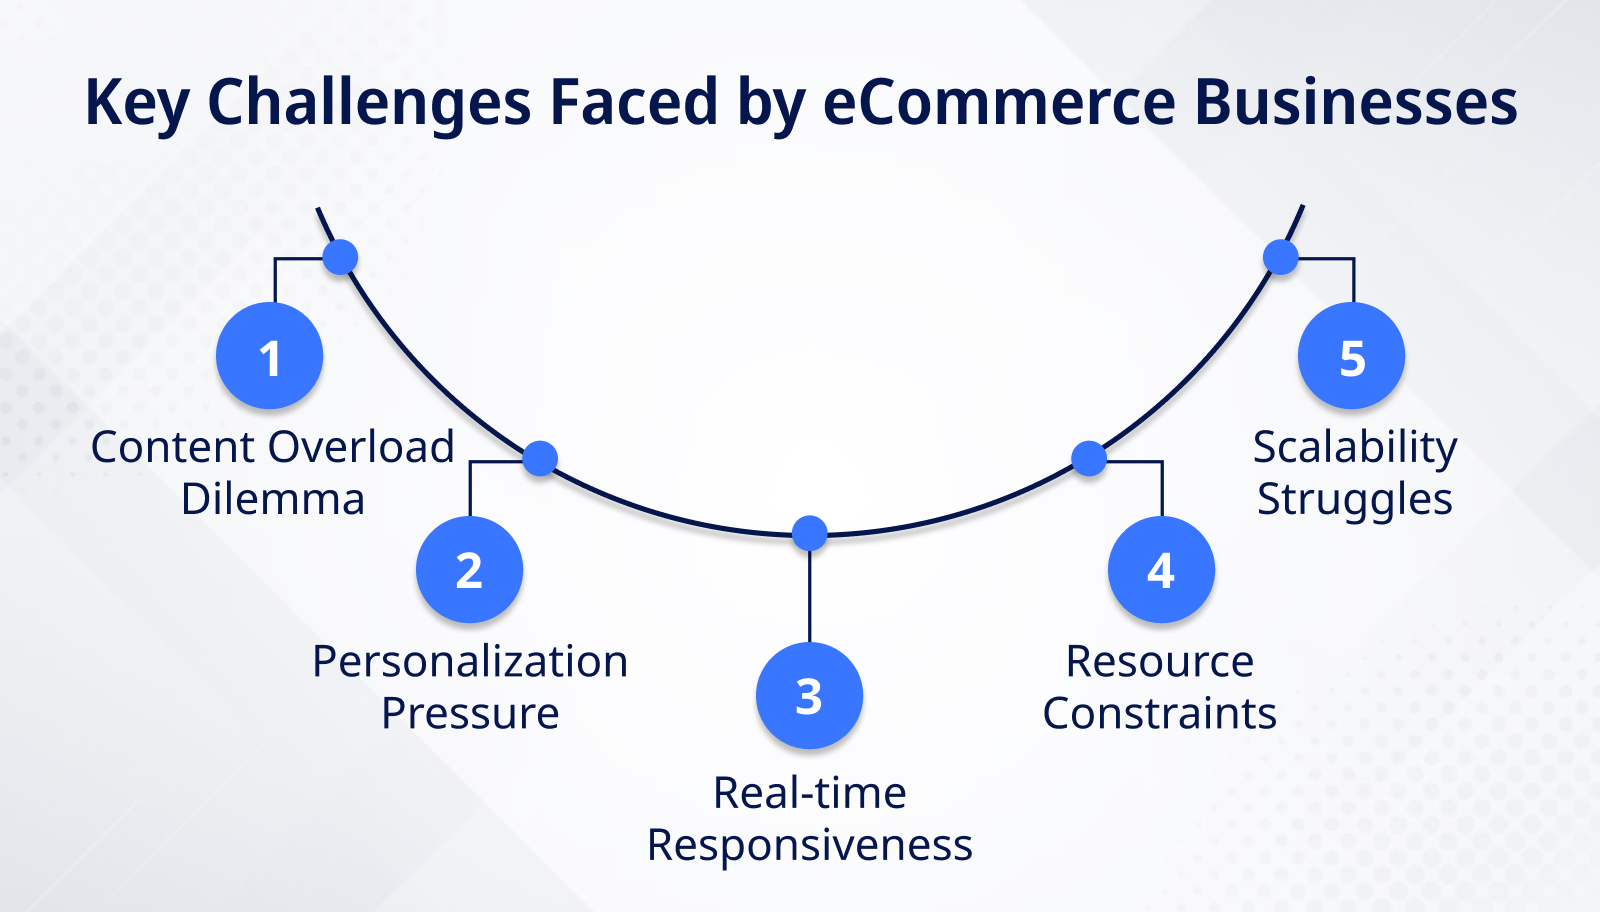 Key Challenges Faced by eCommerce Businesses